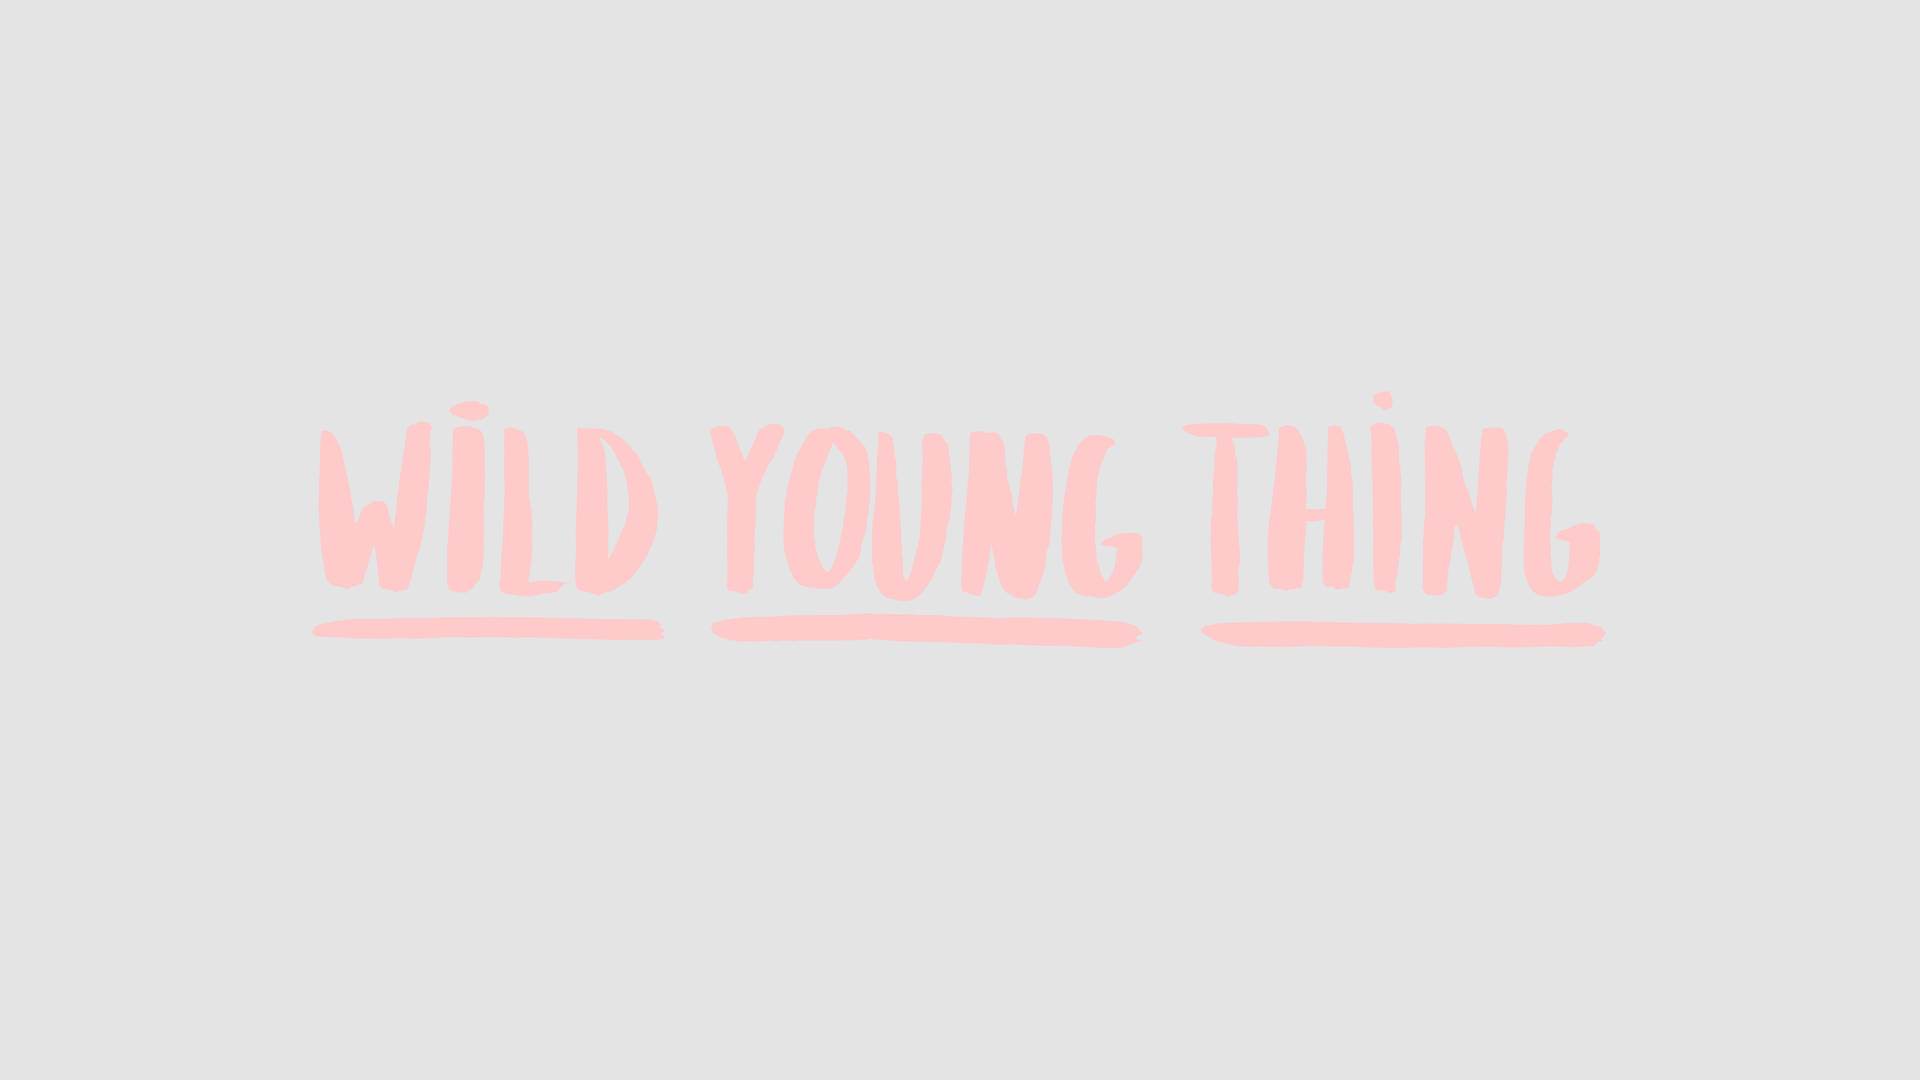 Wild Young Thing Pastel Aesthetic Background